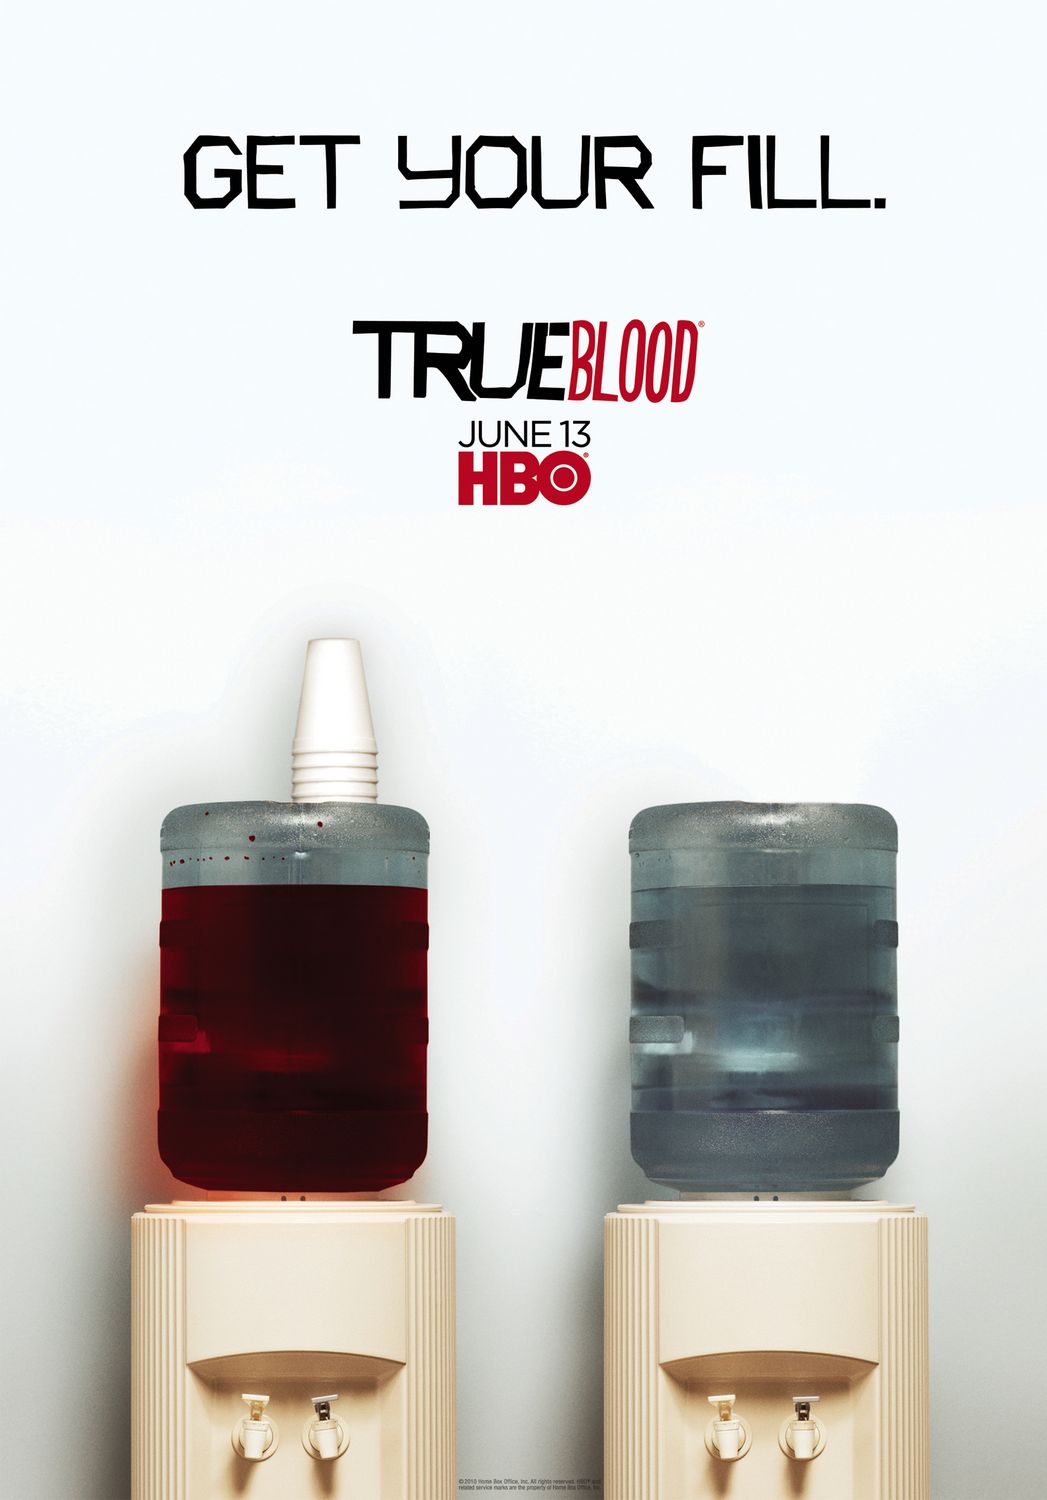 Extra Large TV Poster Image for True Blood (#27 of 76)